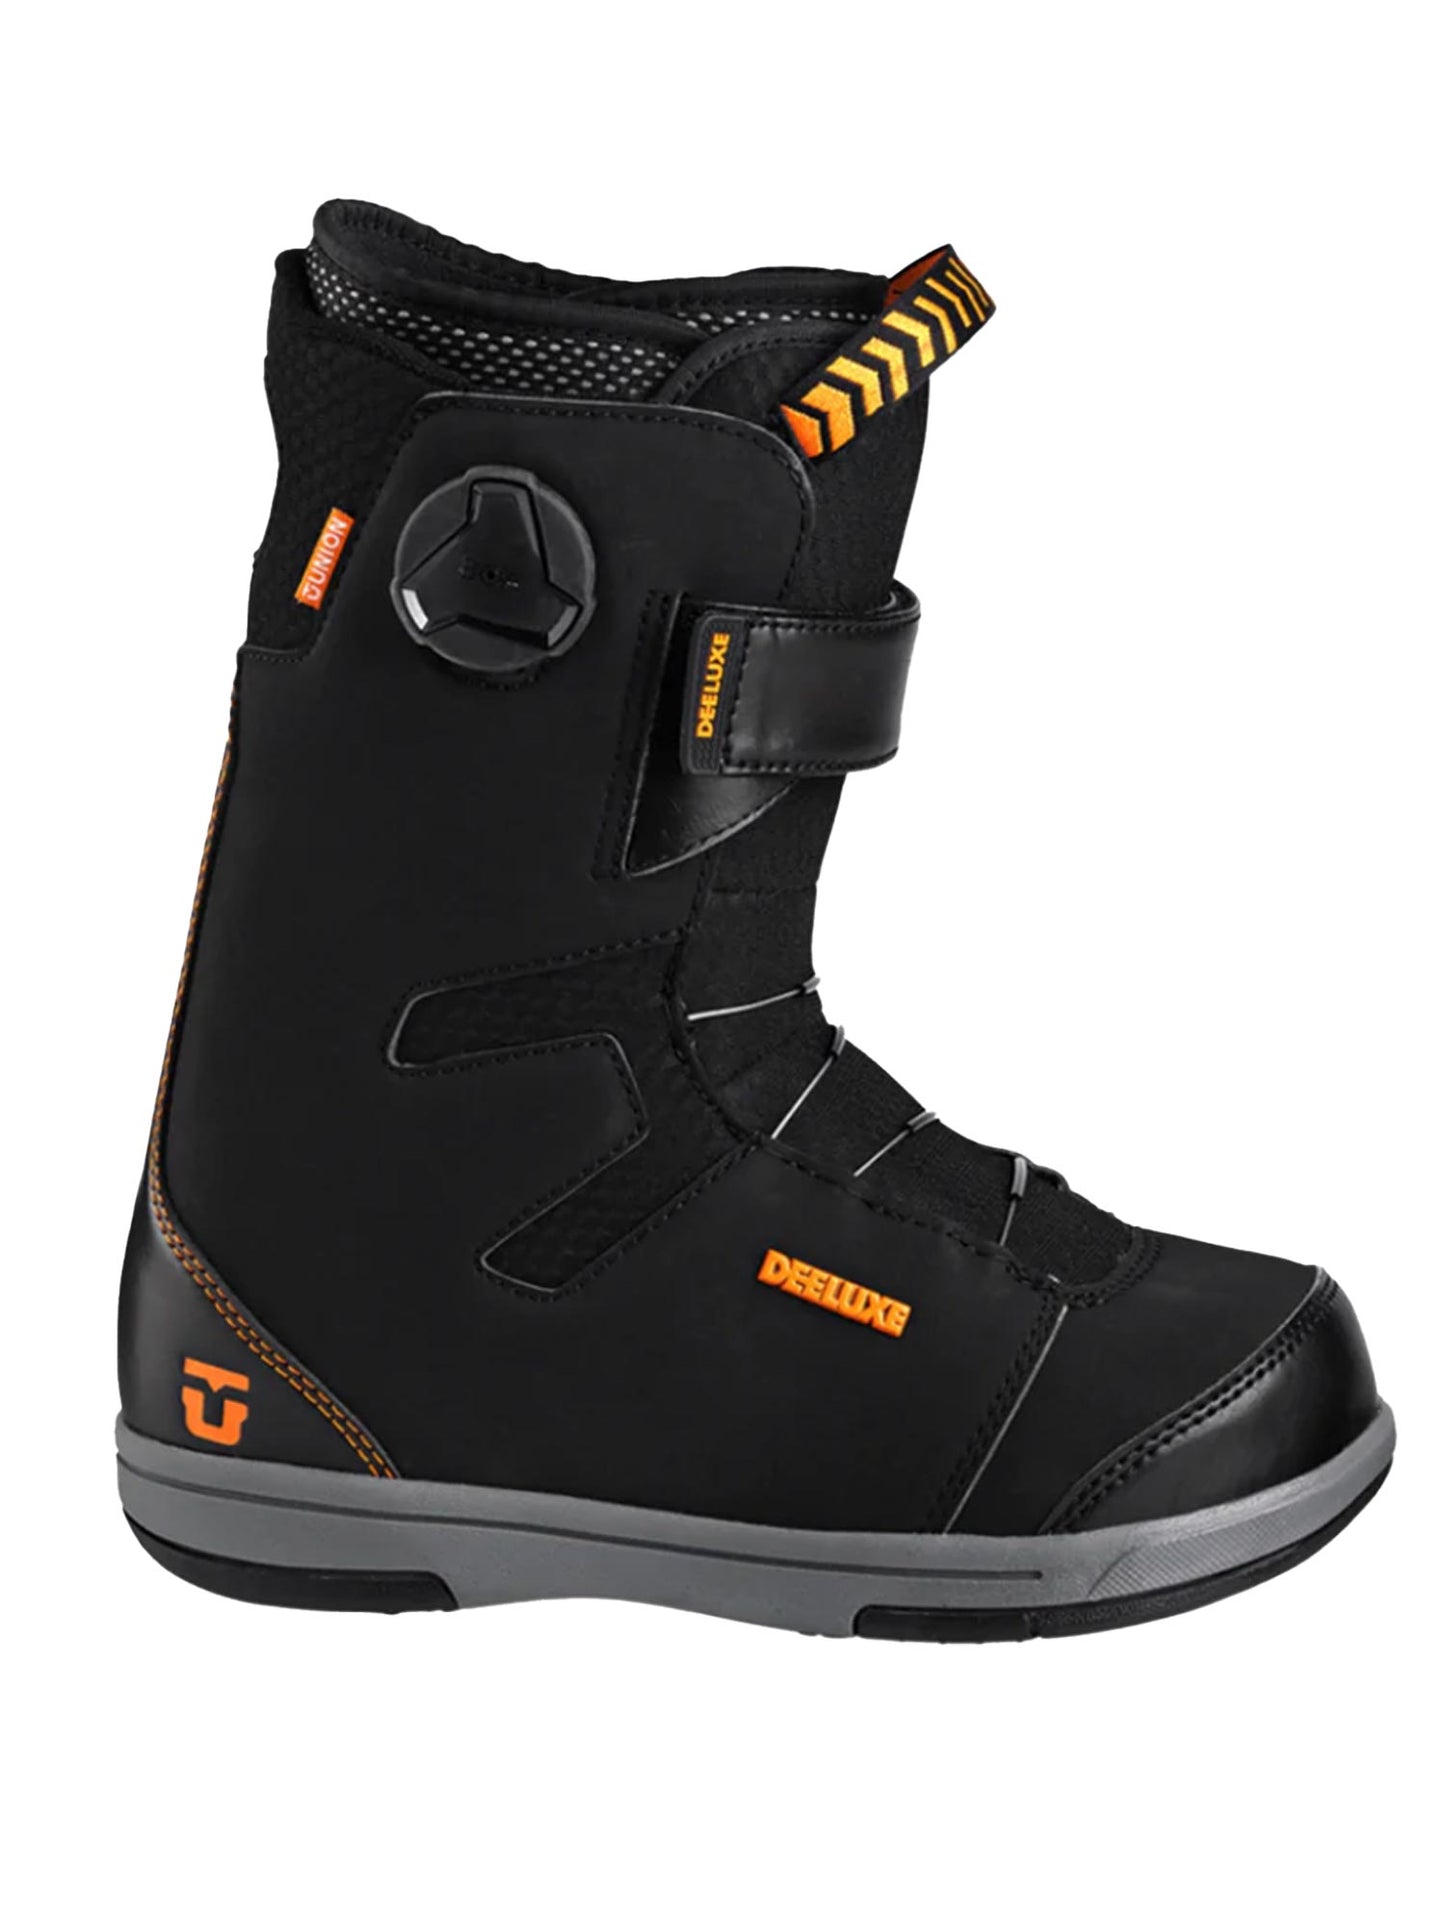 Kids' snowboard boot, black with orange accents